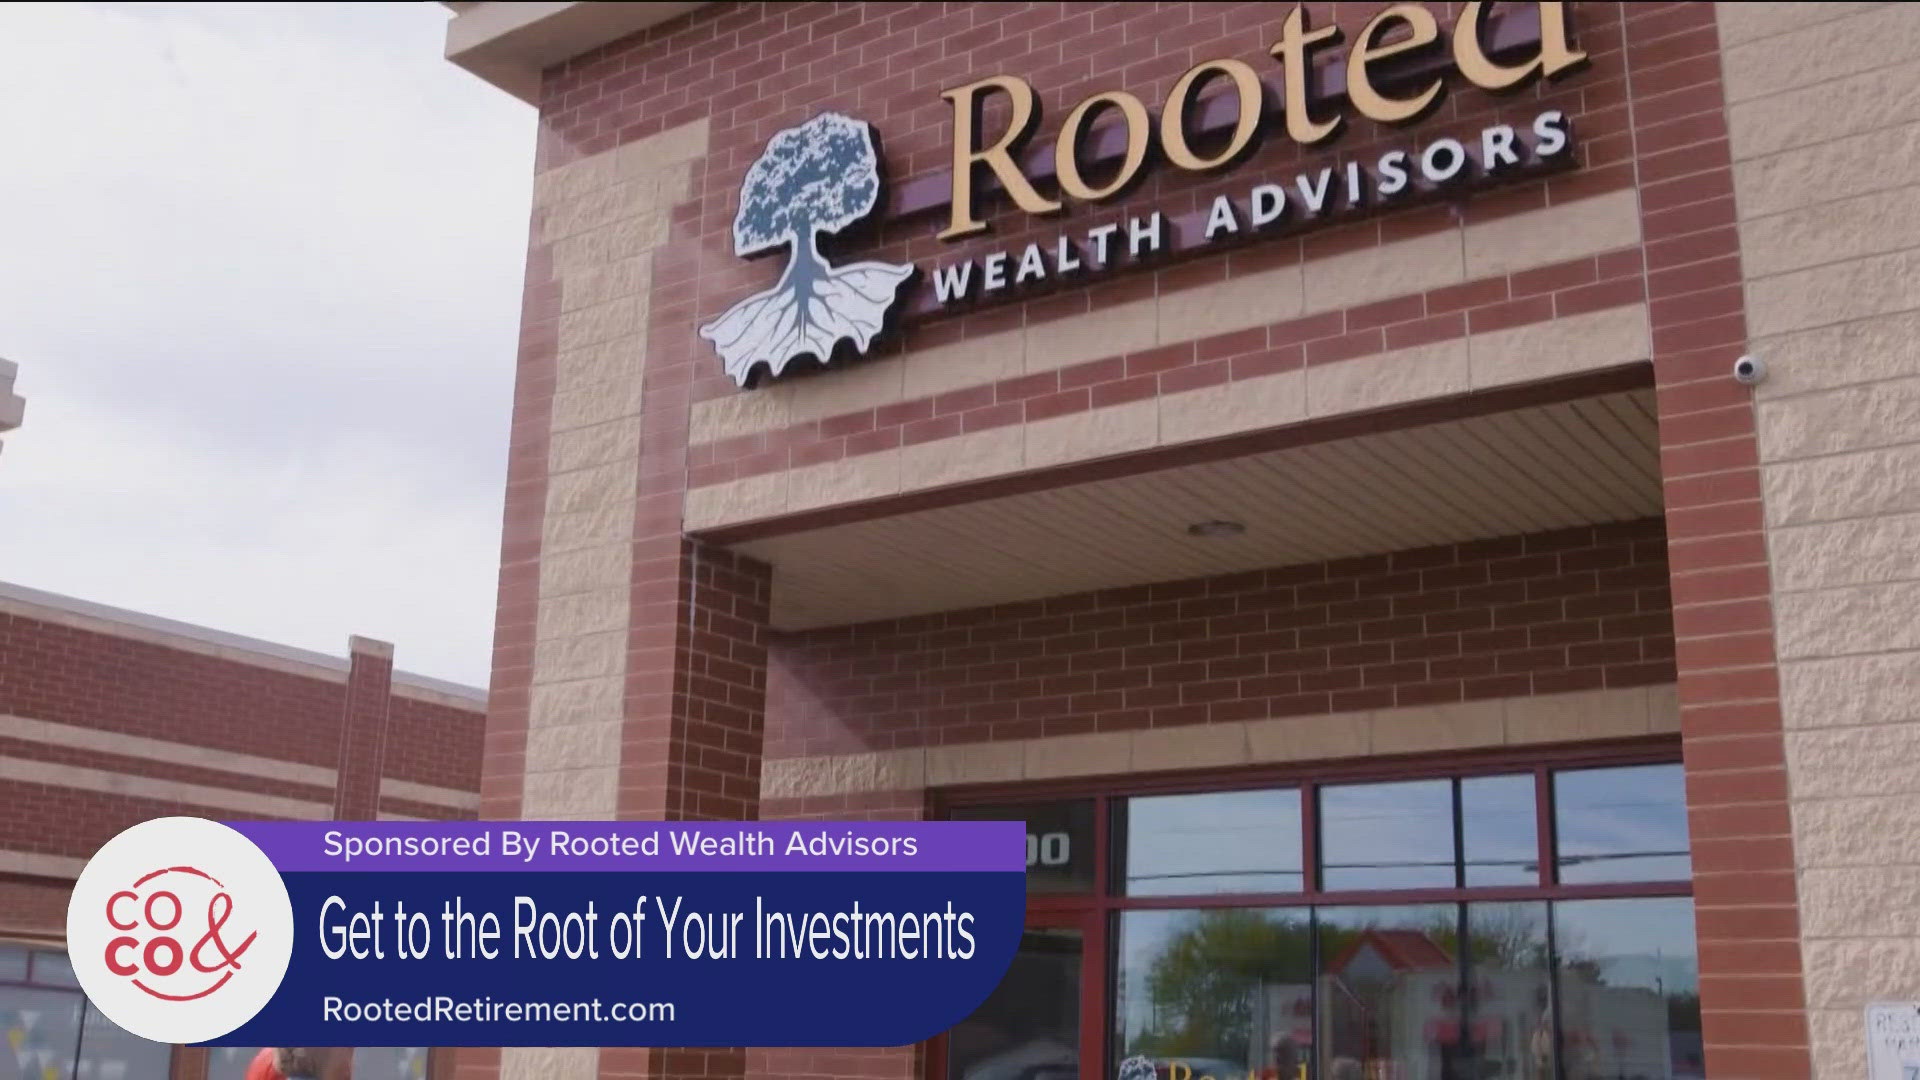 Speak with the team at Rooted Wealth Advisors by calling 303.376.7477 or online at RootedRetirement.com. **PAID CONTENT**